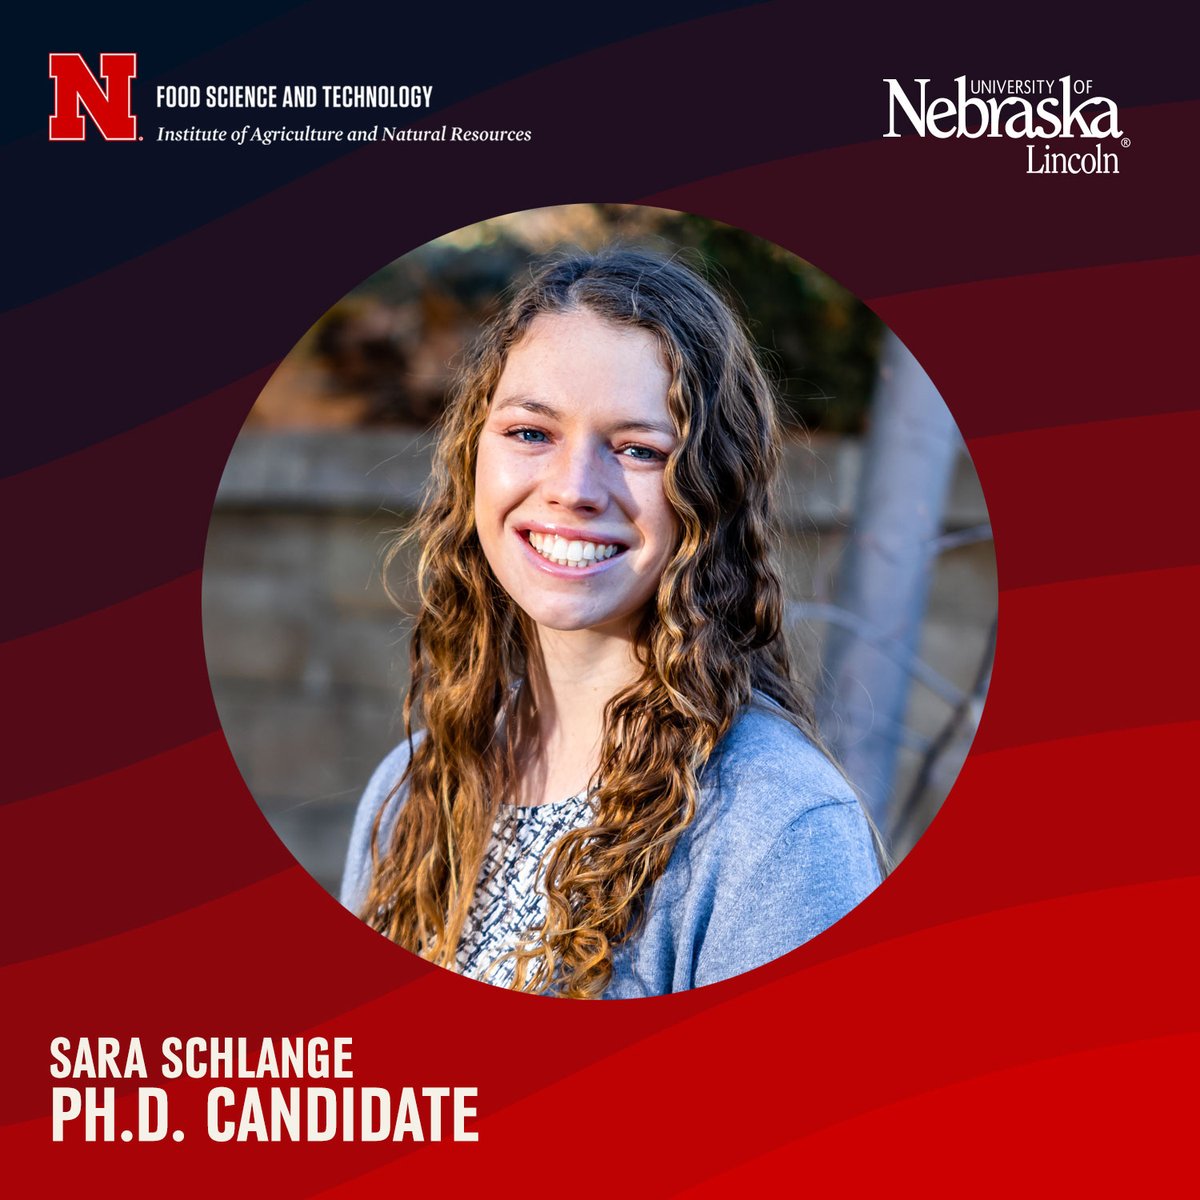 Sara Schlange is pursuing an Ph.D. in #foodscience and #Technology under the supervision of Dr. Melanie
Downs and Dr. Phil Johnson. Sara’s research looks to improve allergen detection by using mass-
spectrometry. #UNL #ImmuneResponse #Proteins #AllergenFree #ELISA